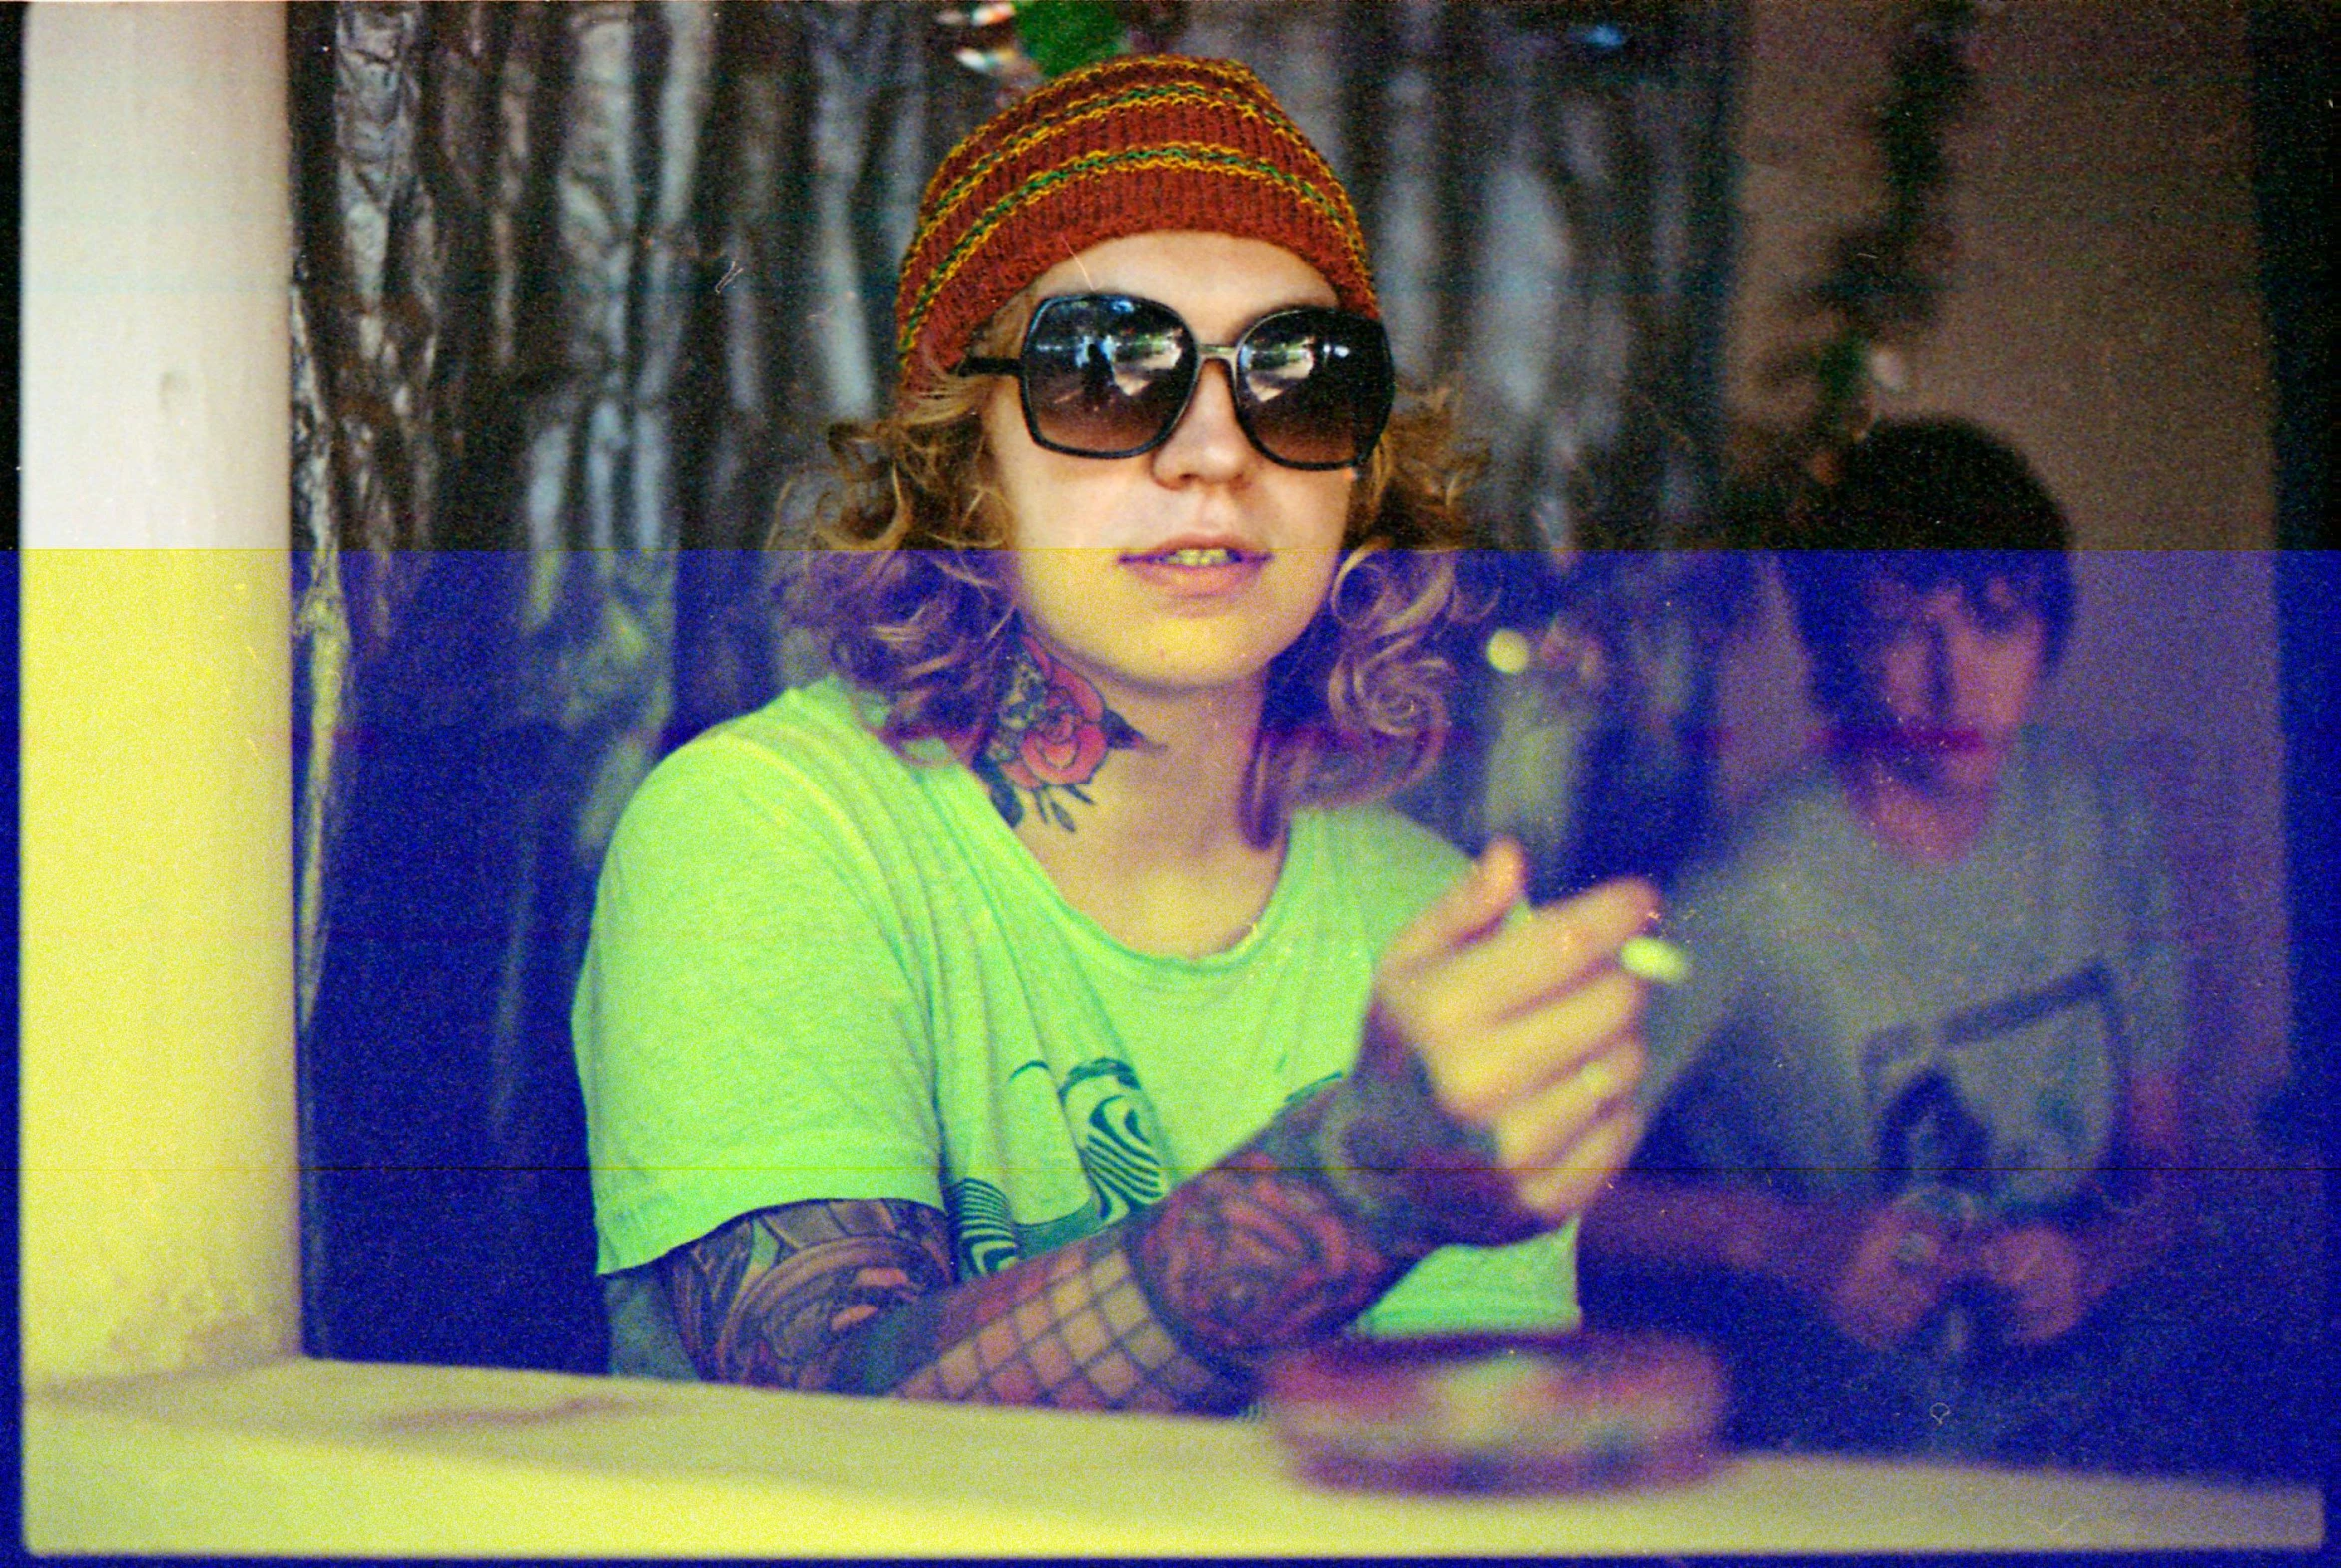 a person sitting at a table with a cell phone, an album cover, inspired by Lasar Segall, flickr, wearing sunglasses and a hat, tattoo parlor photo, scanned in, lizard king / queen forgiveing